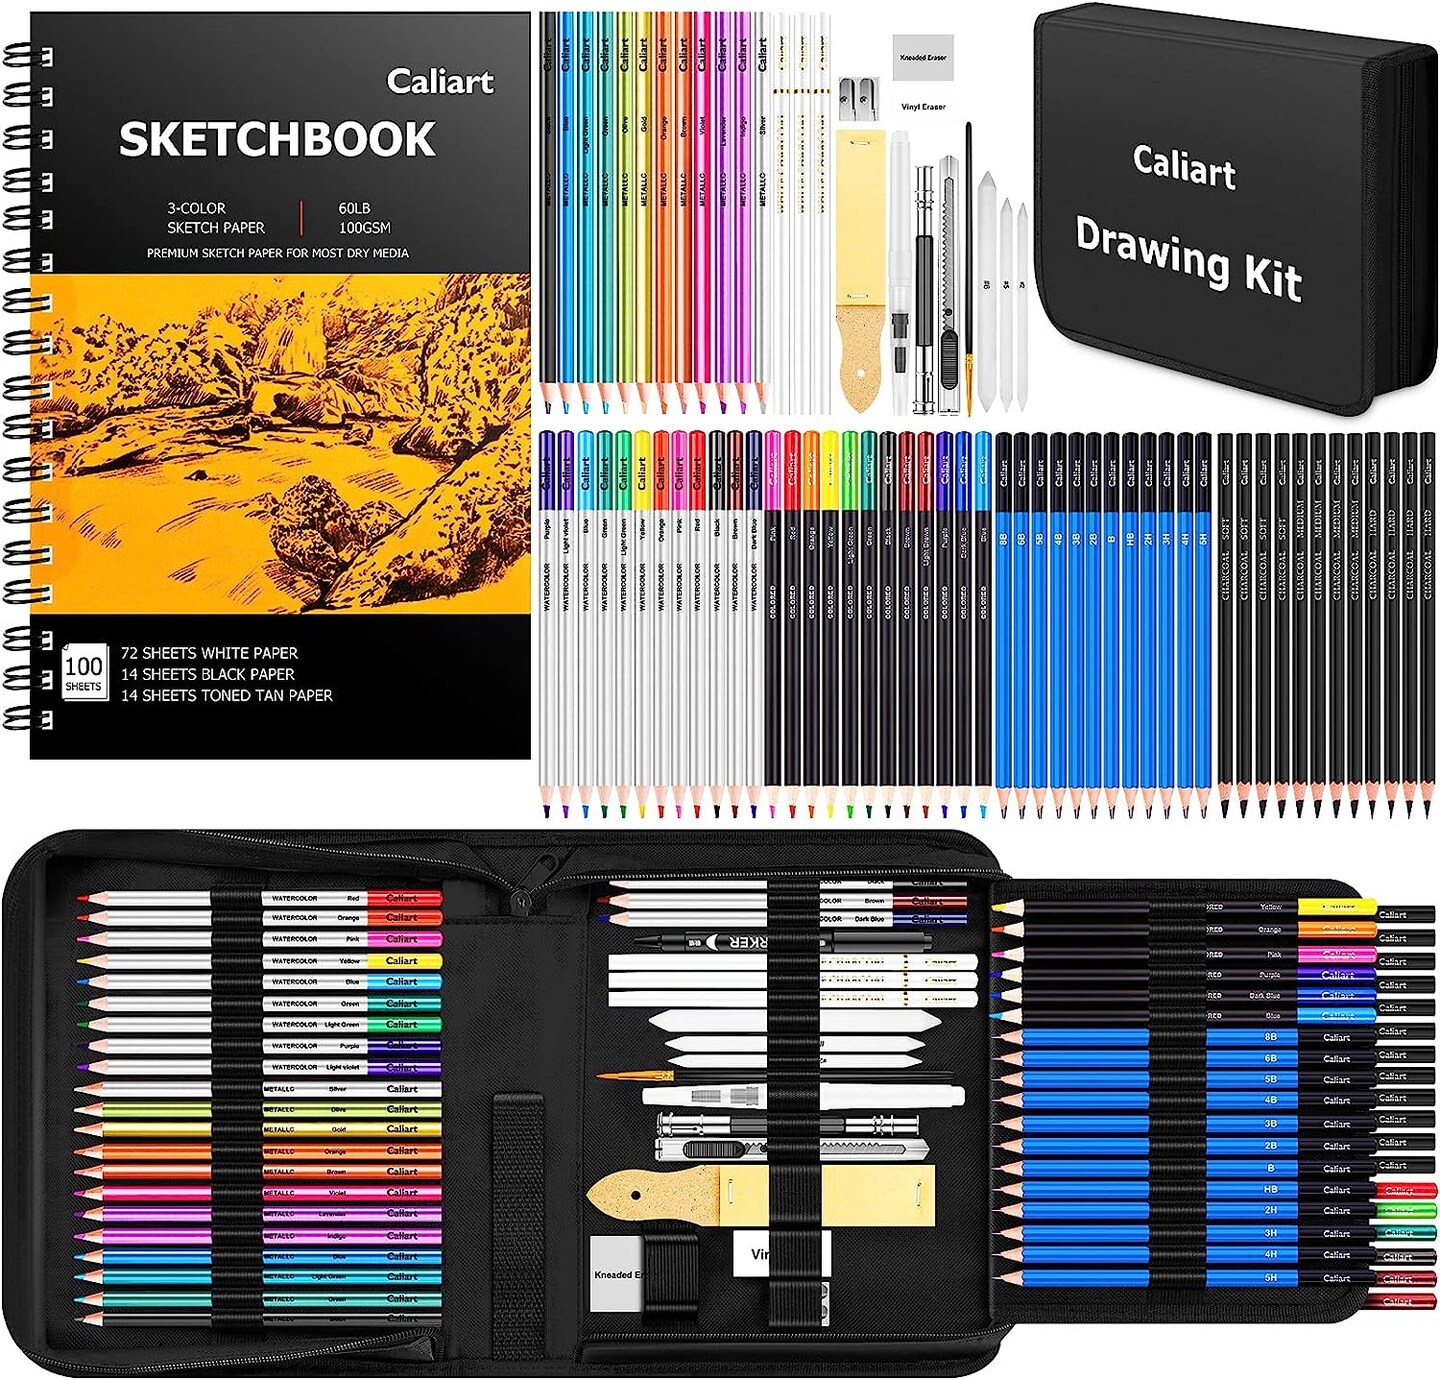 176 Pcs Art Supplies Sketching Kit with 100 Sheets 3-Color Sketch Book